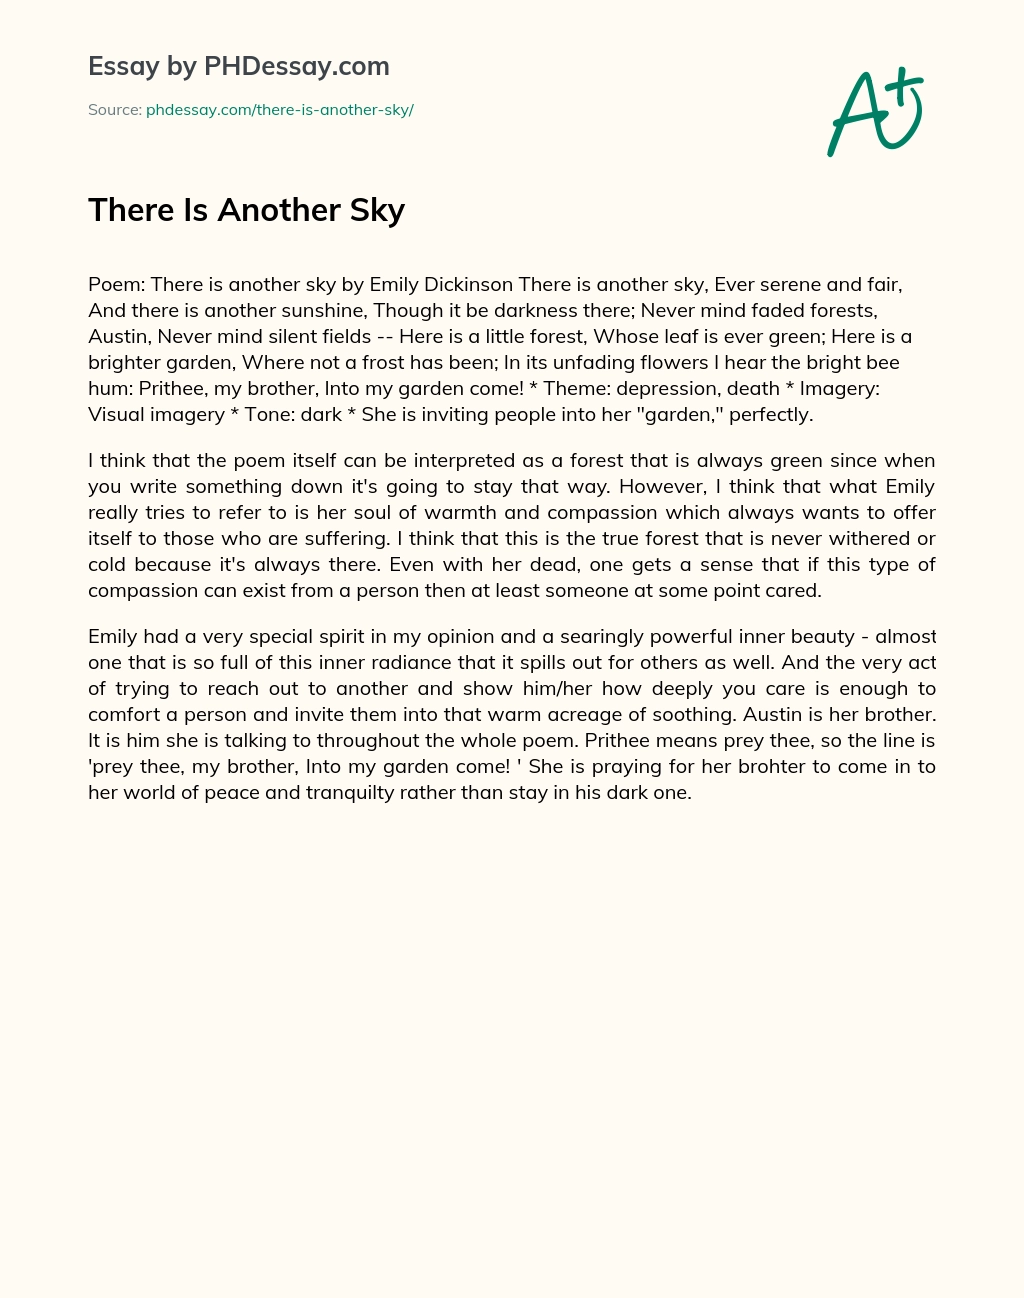 There Is Another Sky essay